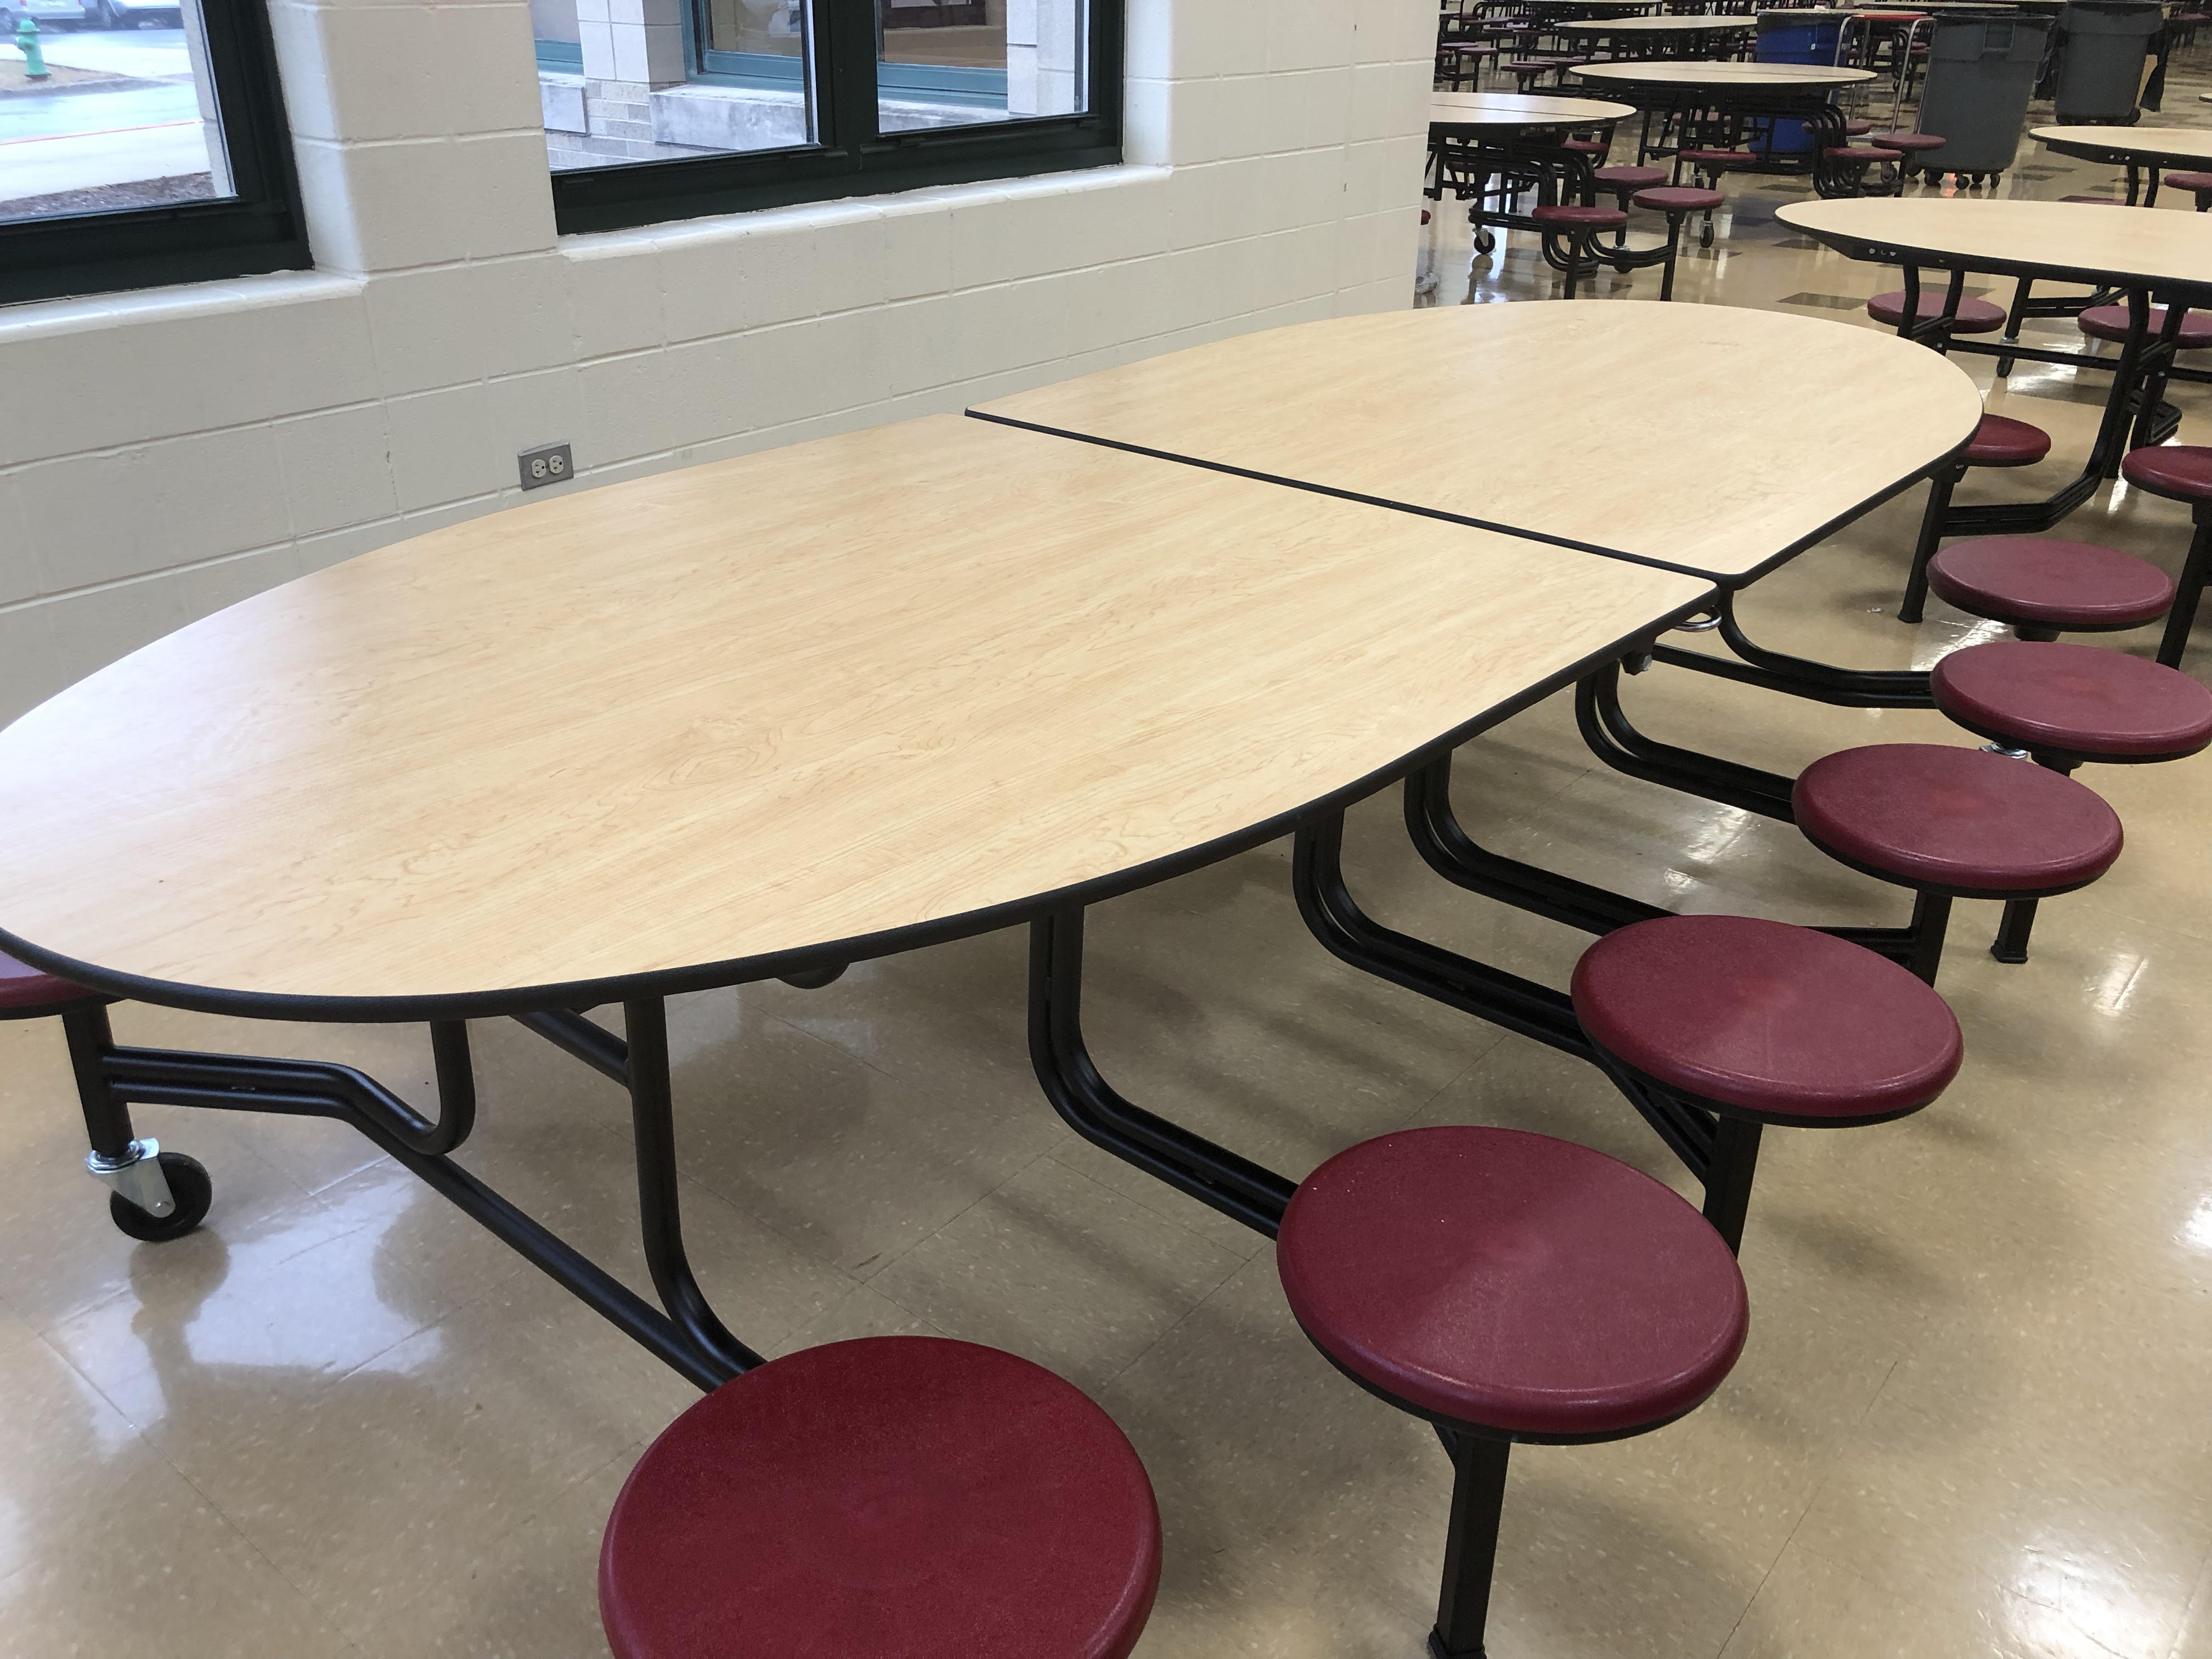 OPINION: The changing of lunch tables